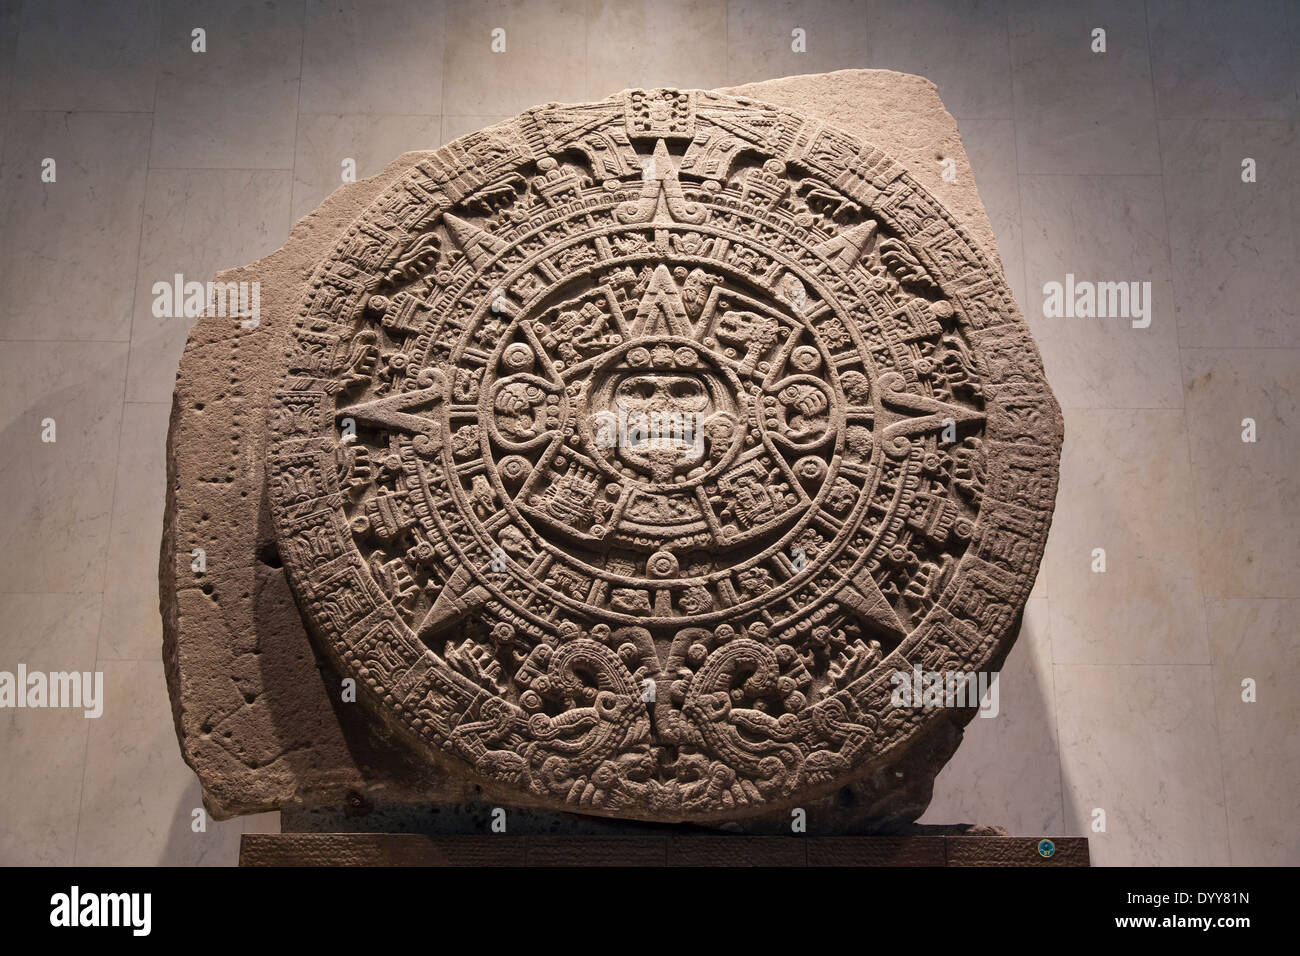 Aztec calendar stone at the National Museum of Anthropology - Miguel Hidalgo, Mexico City, Federal District, Mexico Stock Photo